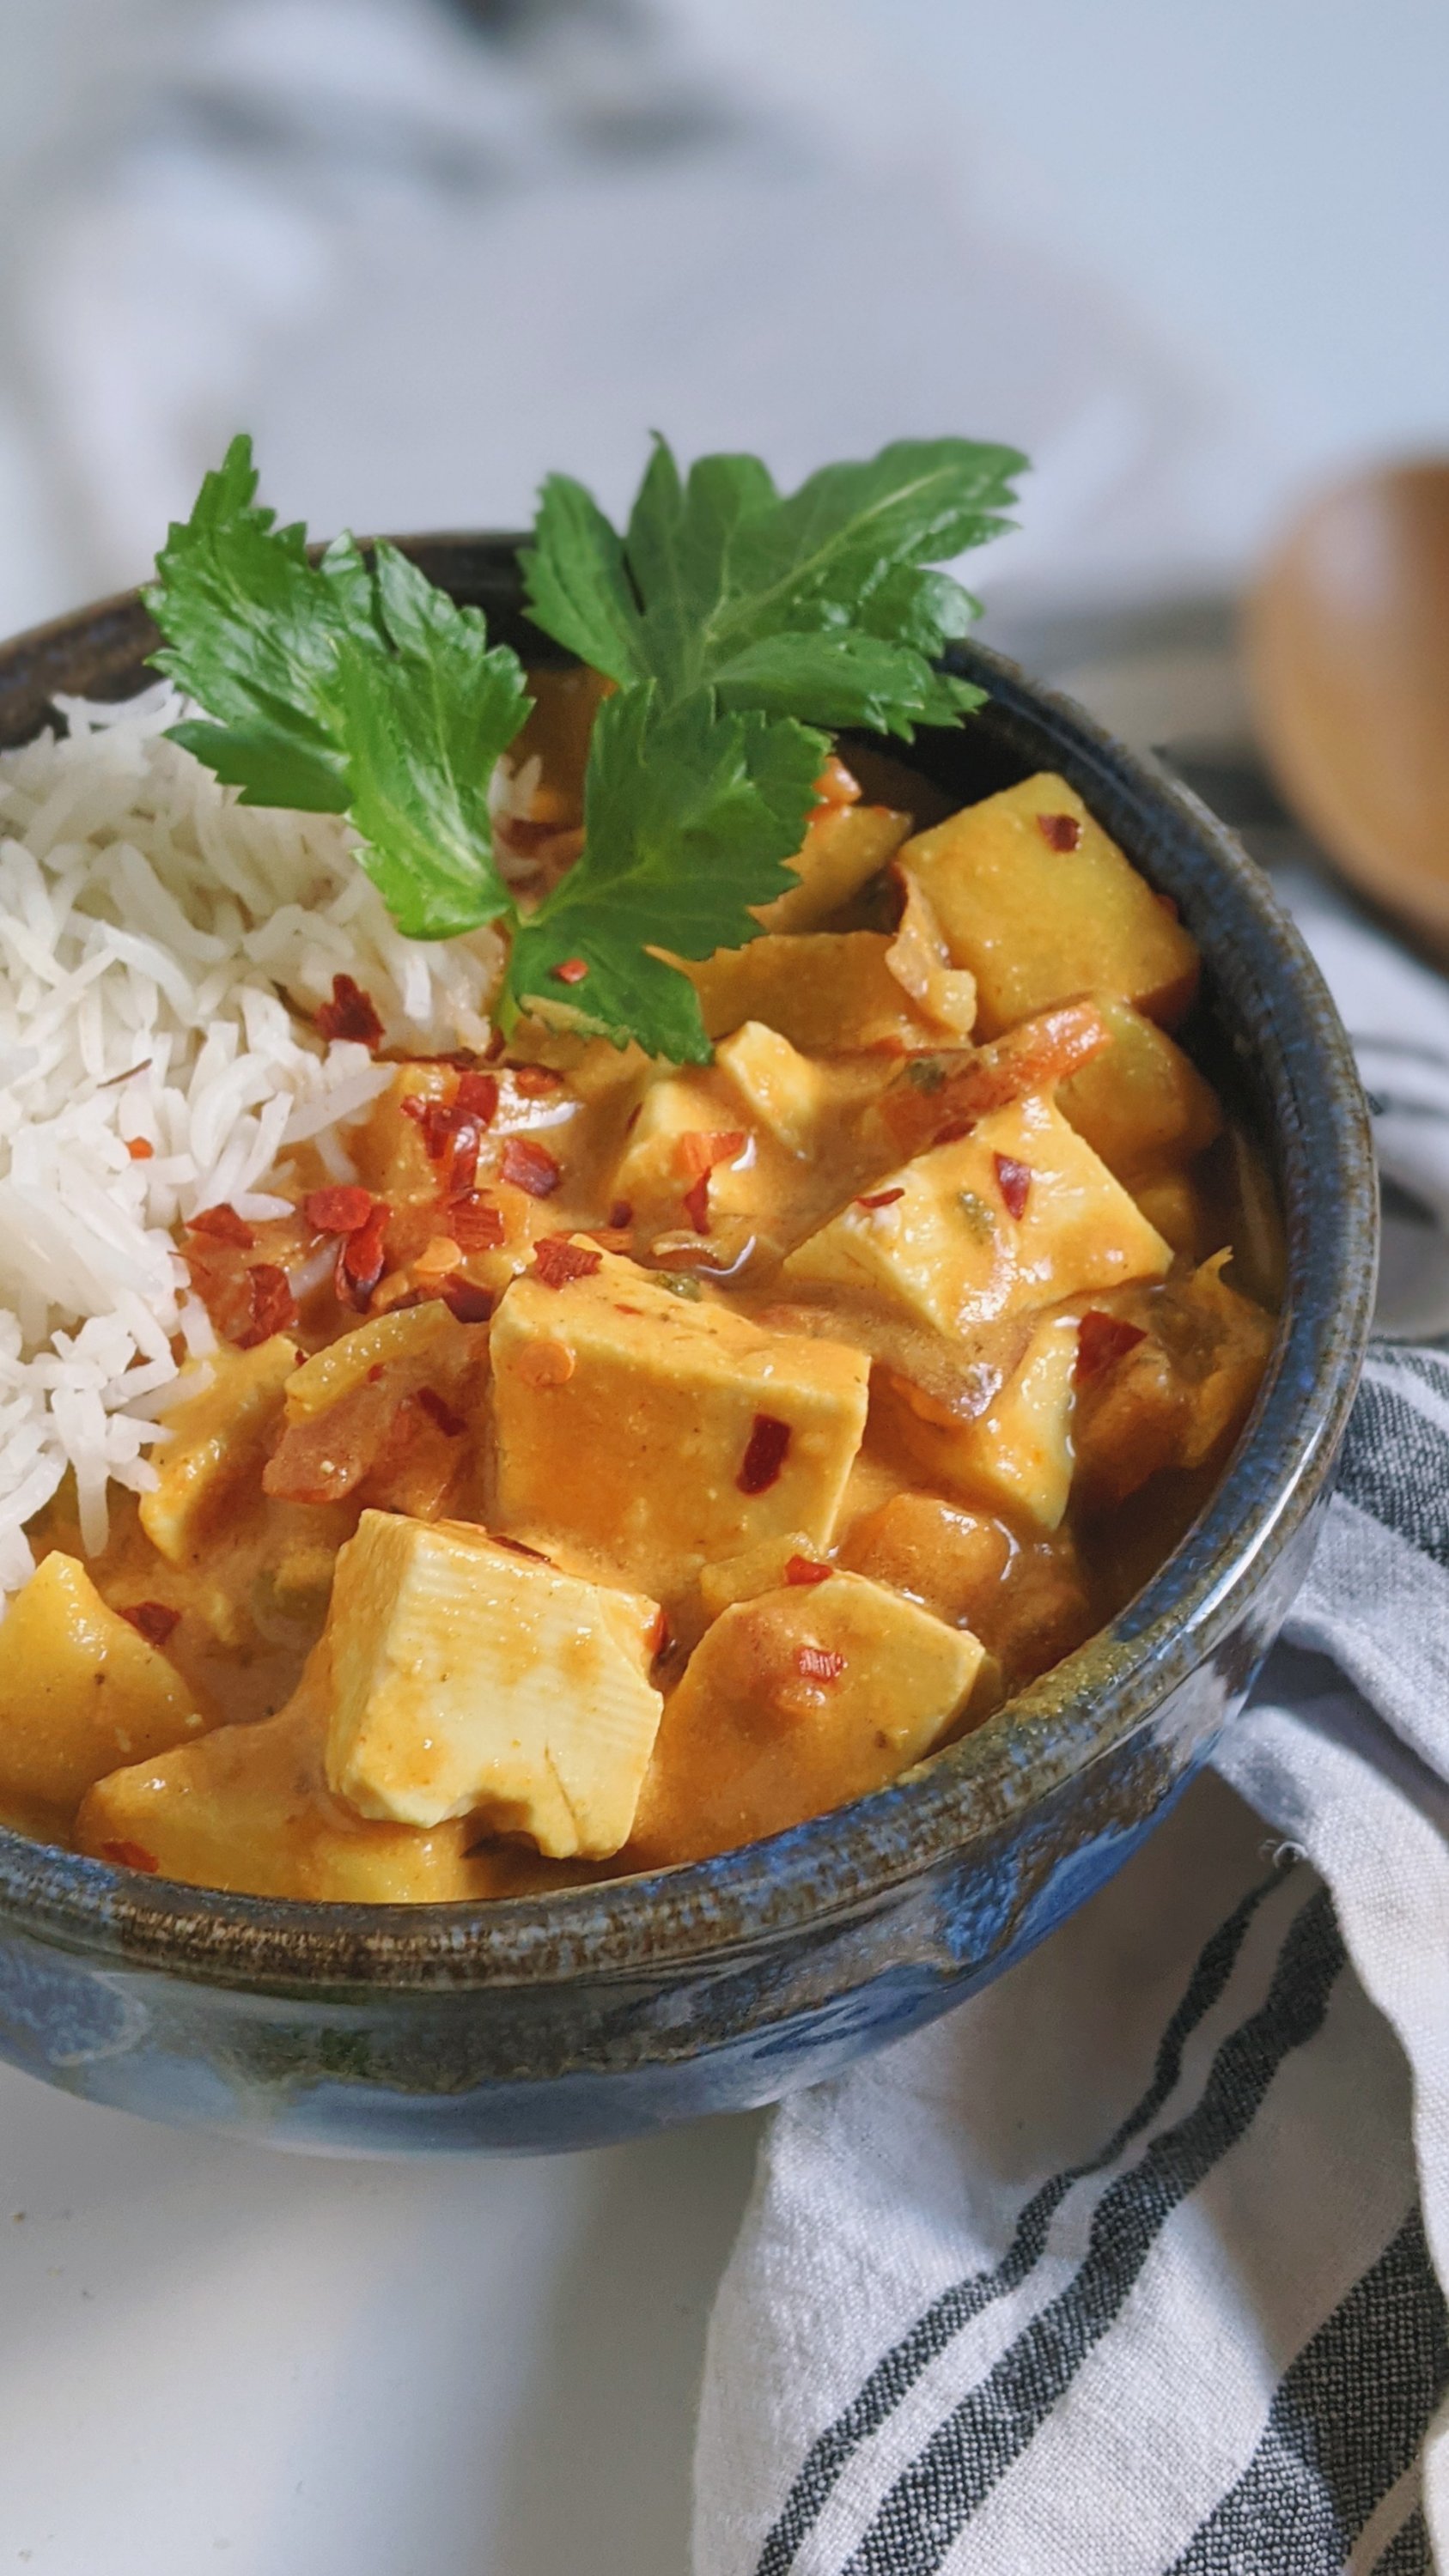 healthy tofu curry recipe vegan gluten free dairy free coconut milk curry paste with vegetables cilantro pineapple carrots pepper onion